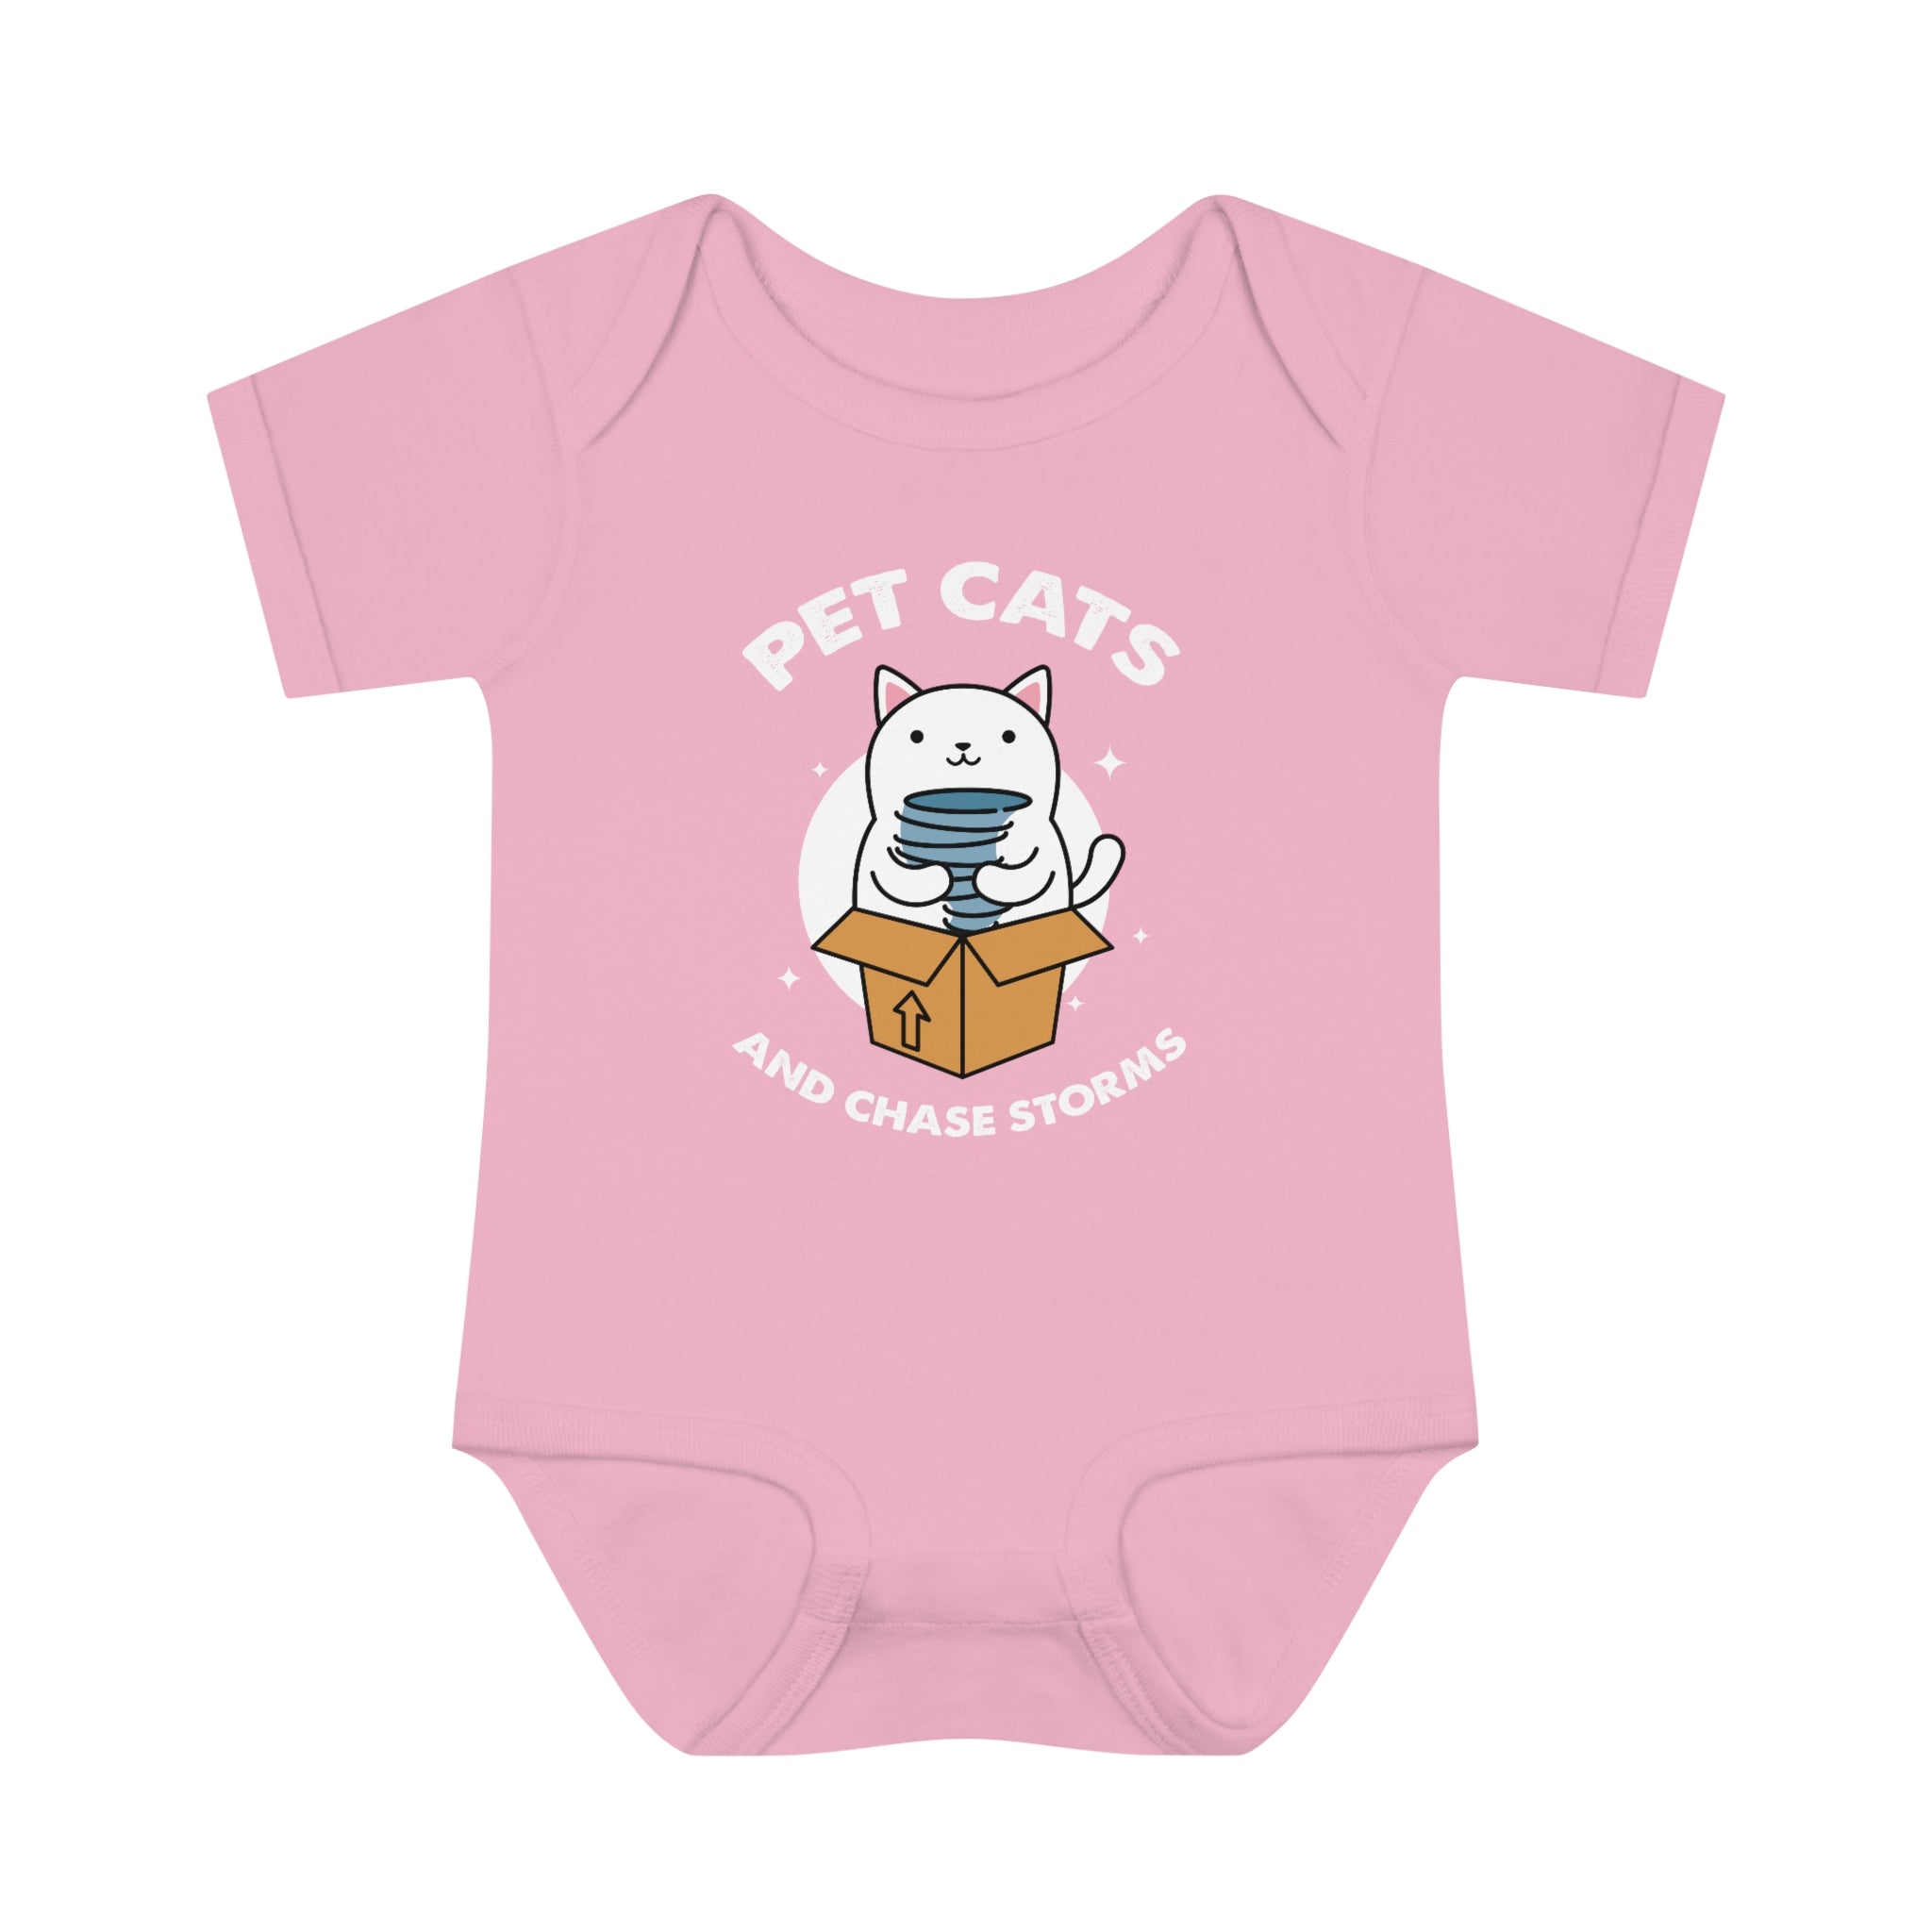 Pet Cats and Chase Storms Infant Bodysuit 